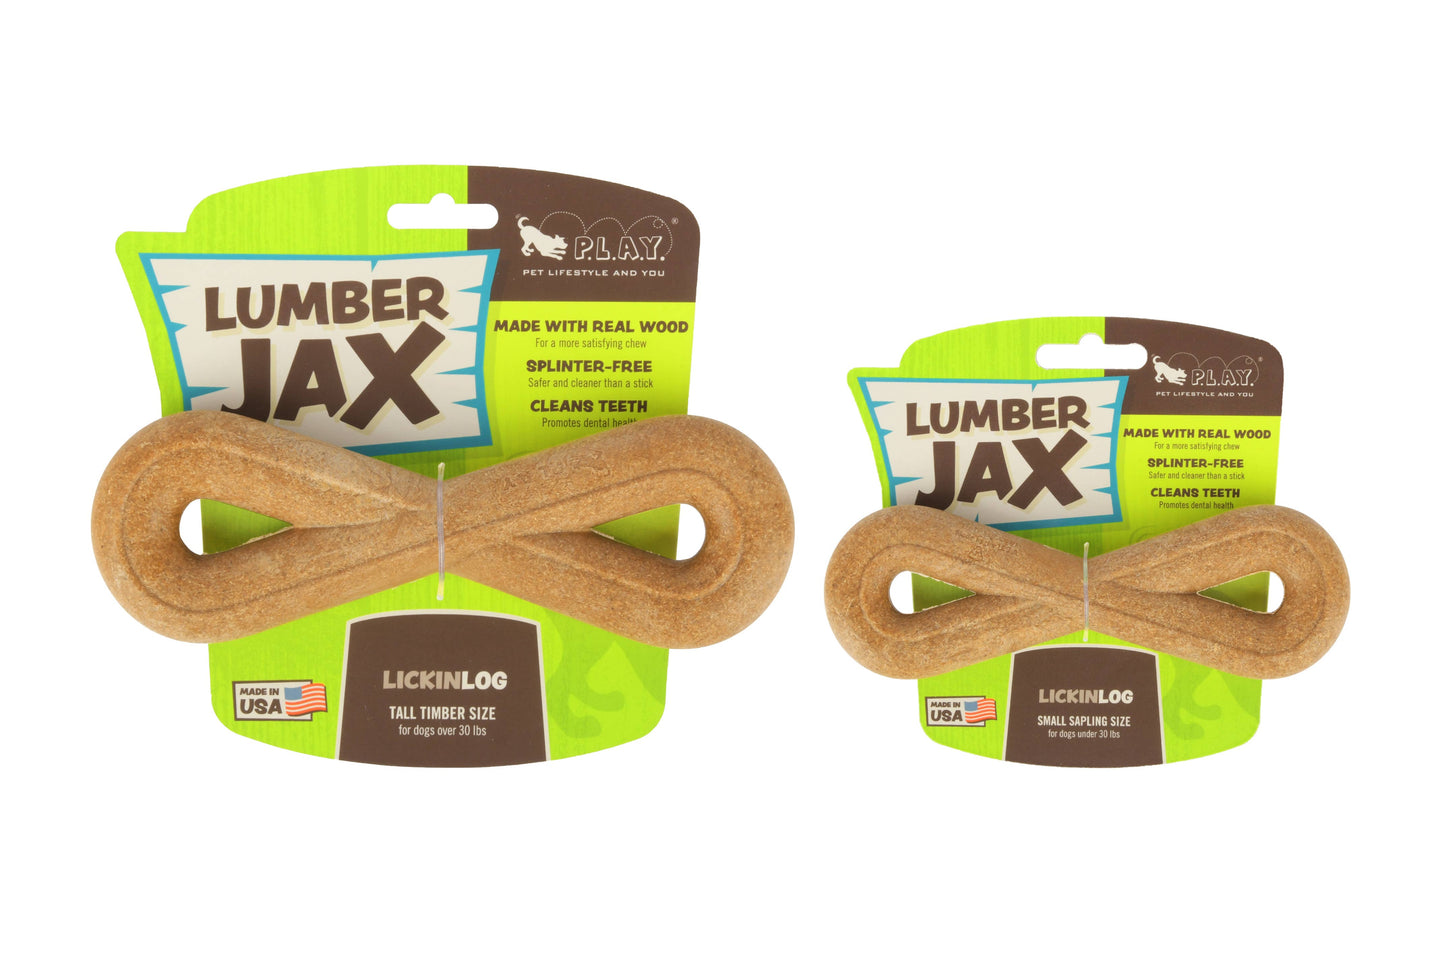 Load image into Gallery viewer, P.L.A.Y. Pet Lifestyle and You - ZoomieRex LumberJax Toy  Image
